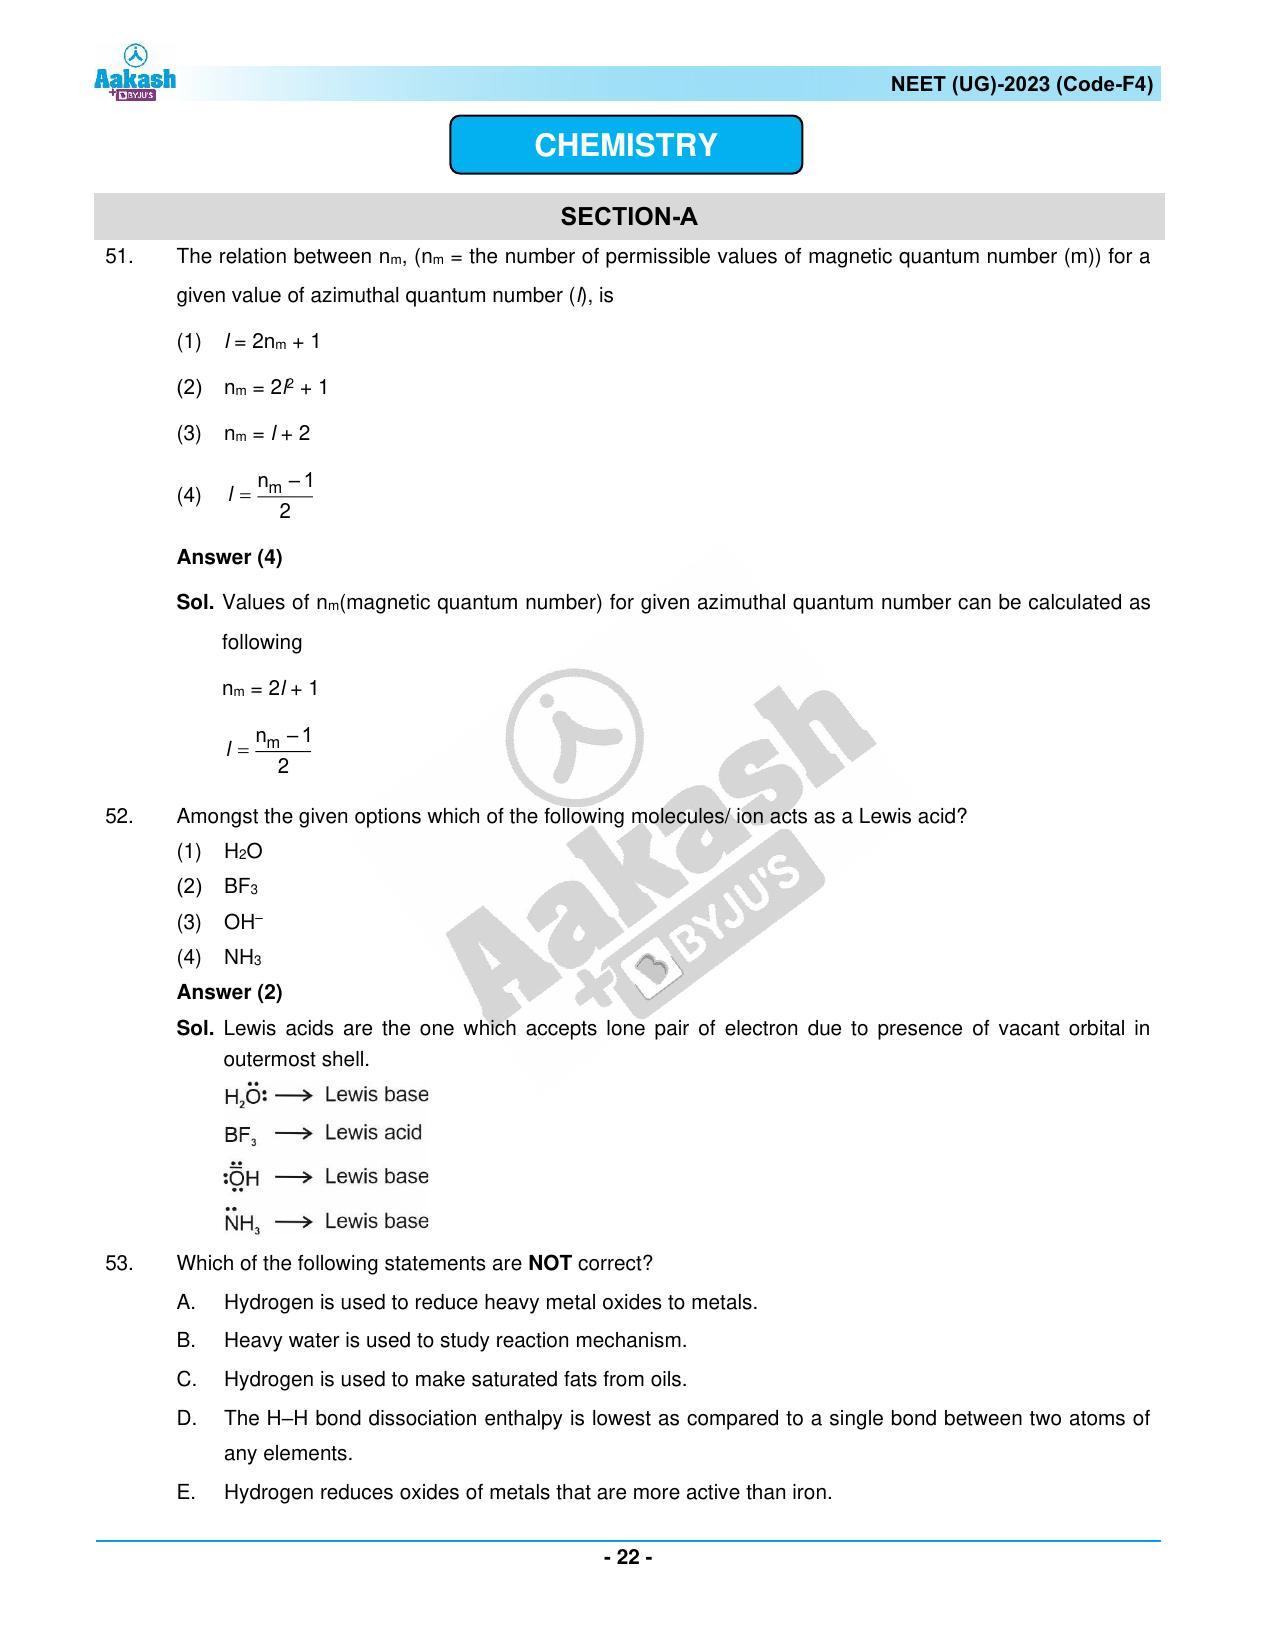 NEET 2023 Question Paper F4 - Page 22